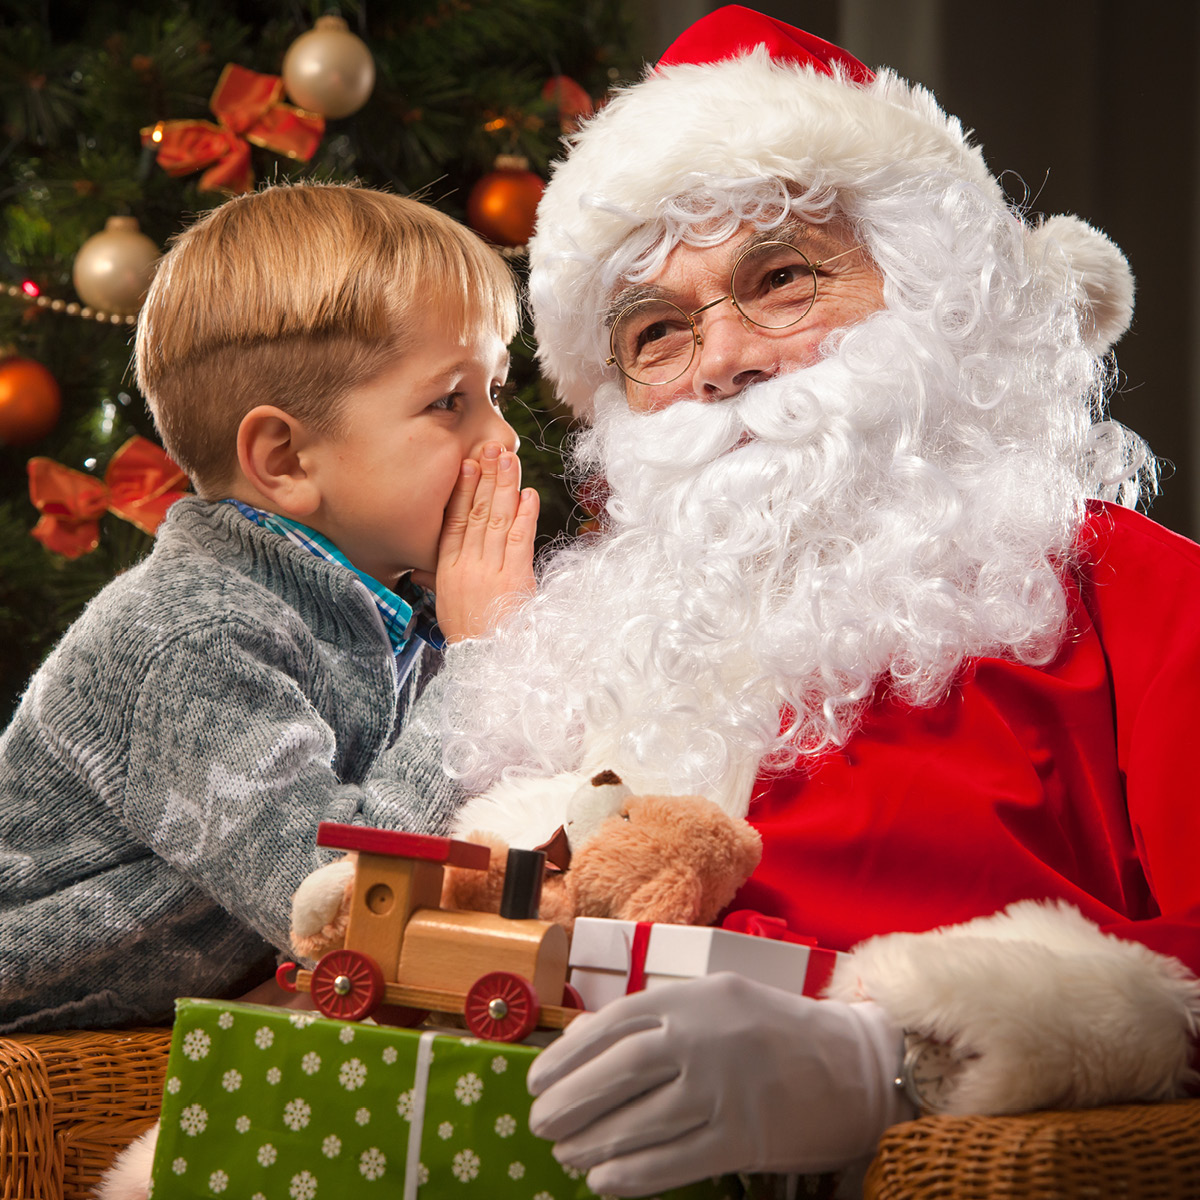 photo of a little child whispering into Santa Claus' ear.